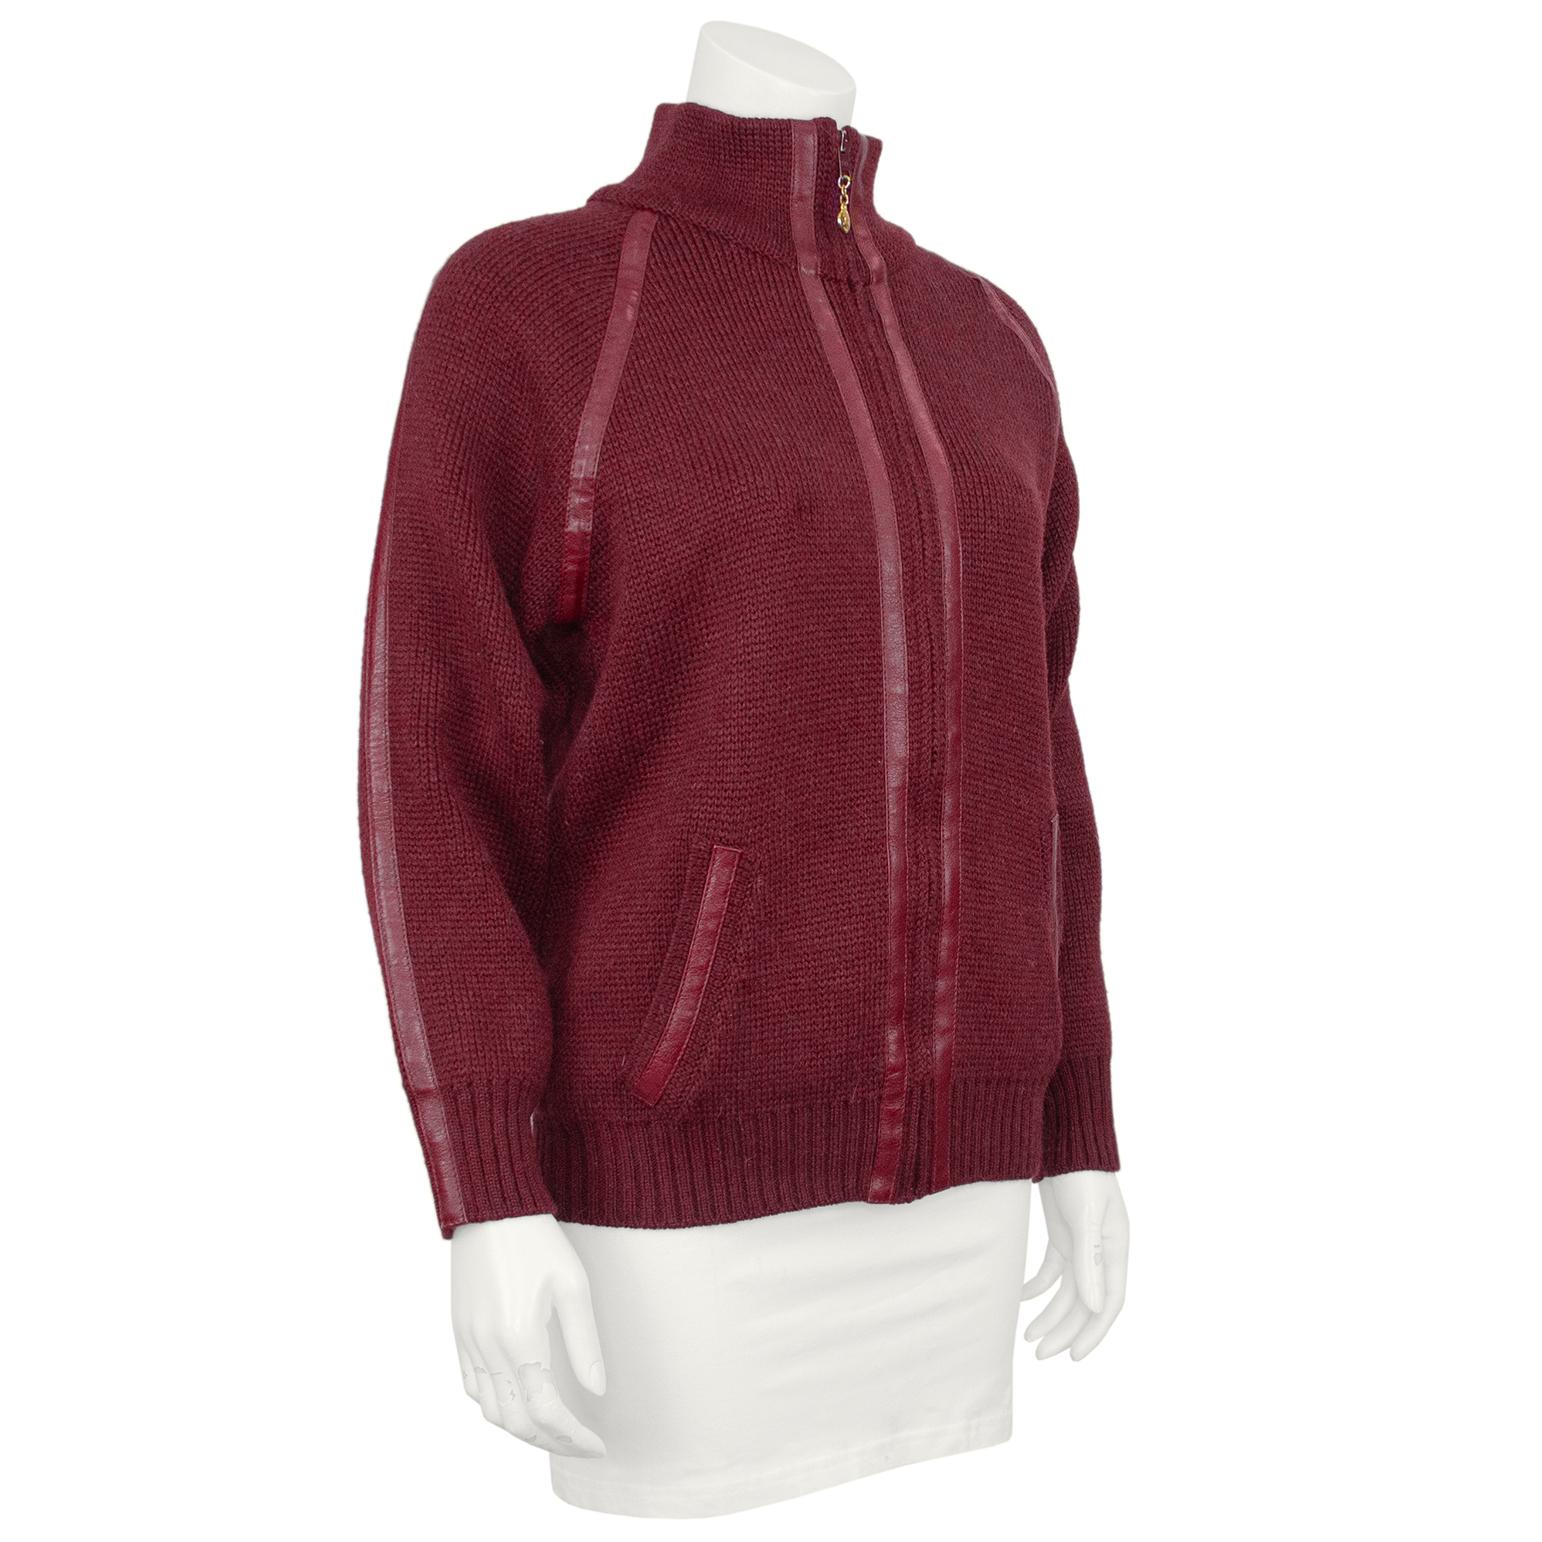 Celine zip up cardigan from the 1970s. Maroon knit wool with monochromatic leather trim throughout. High neck, loose through the body with ribbing at the hips and cuffs. Heavy weight wool, so this can be worn as a sweater or a light jacket. Gold